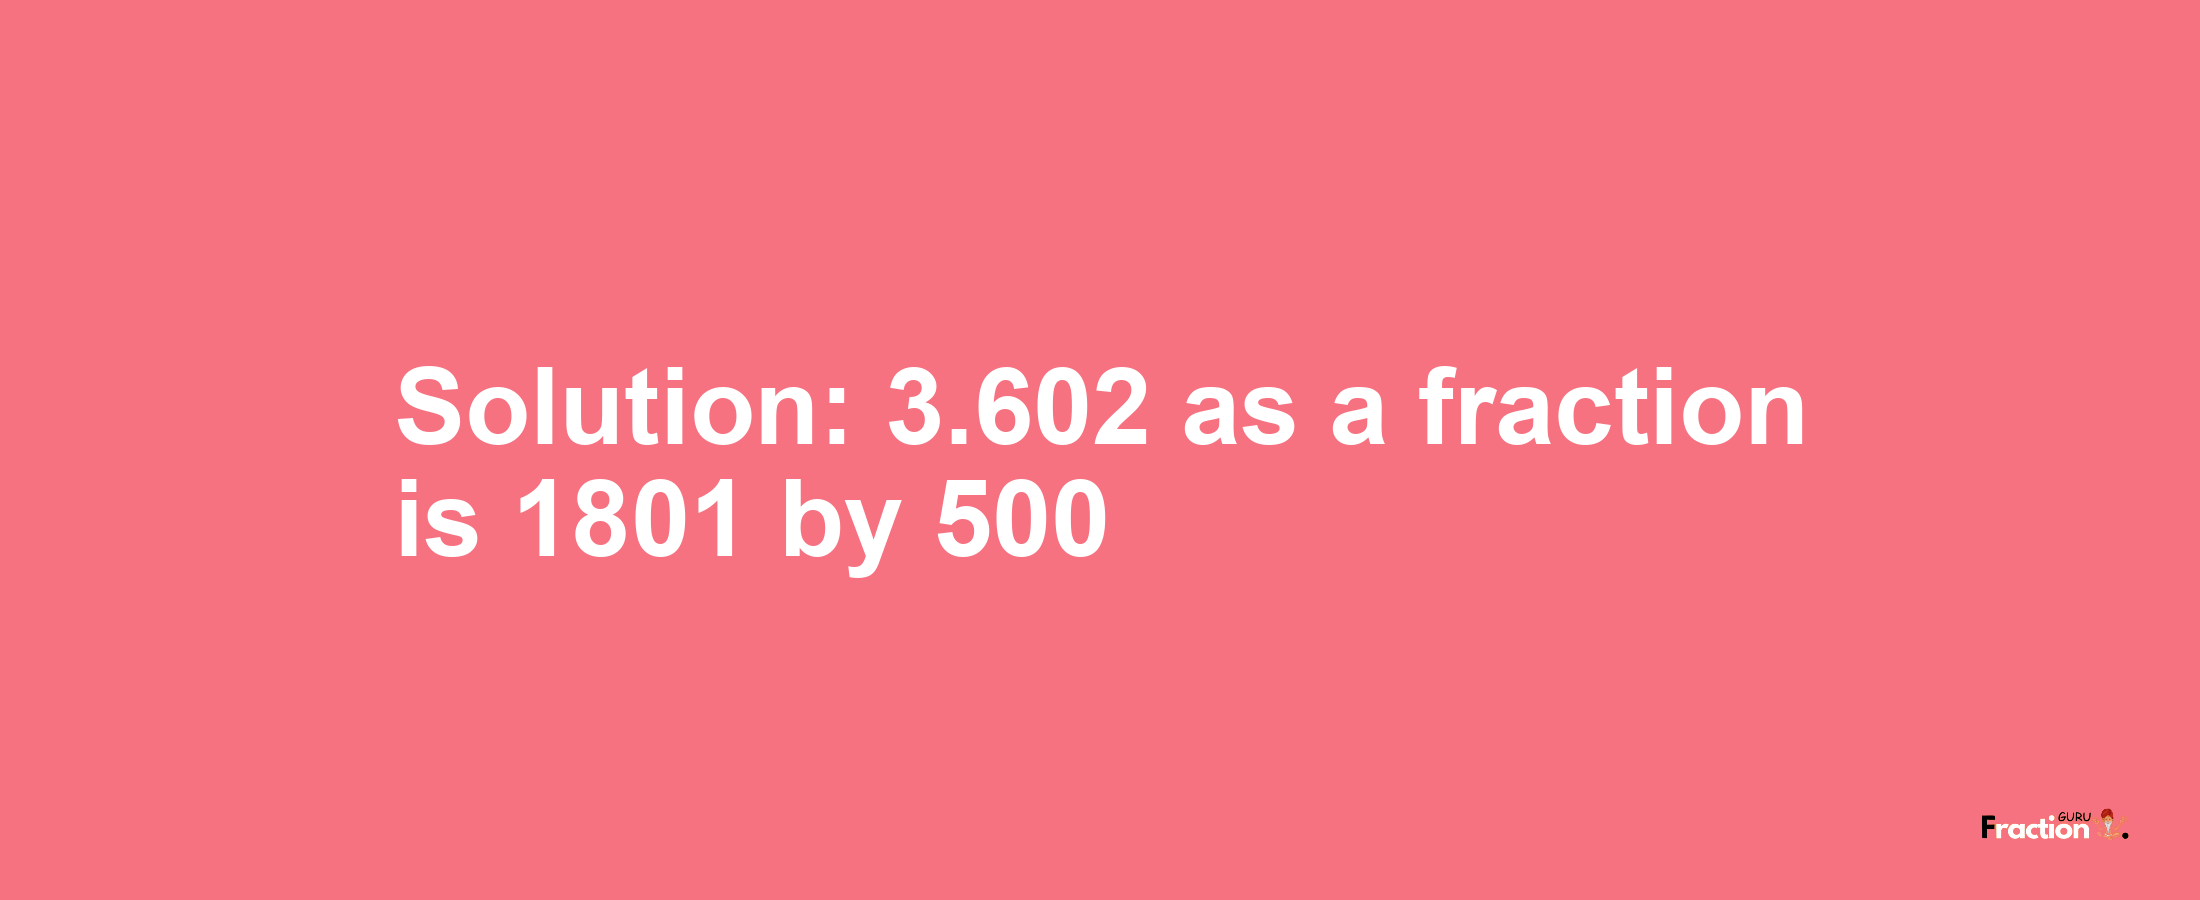 Solution:3.602 as a fraction is 1801/500